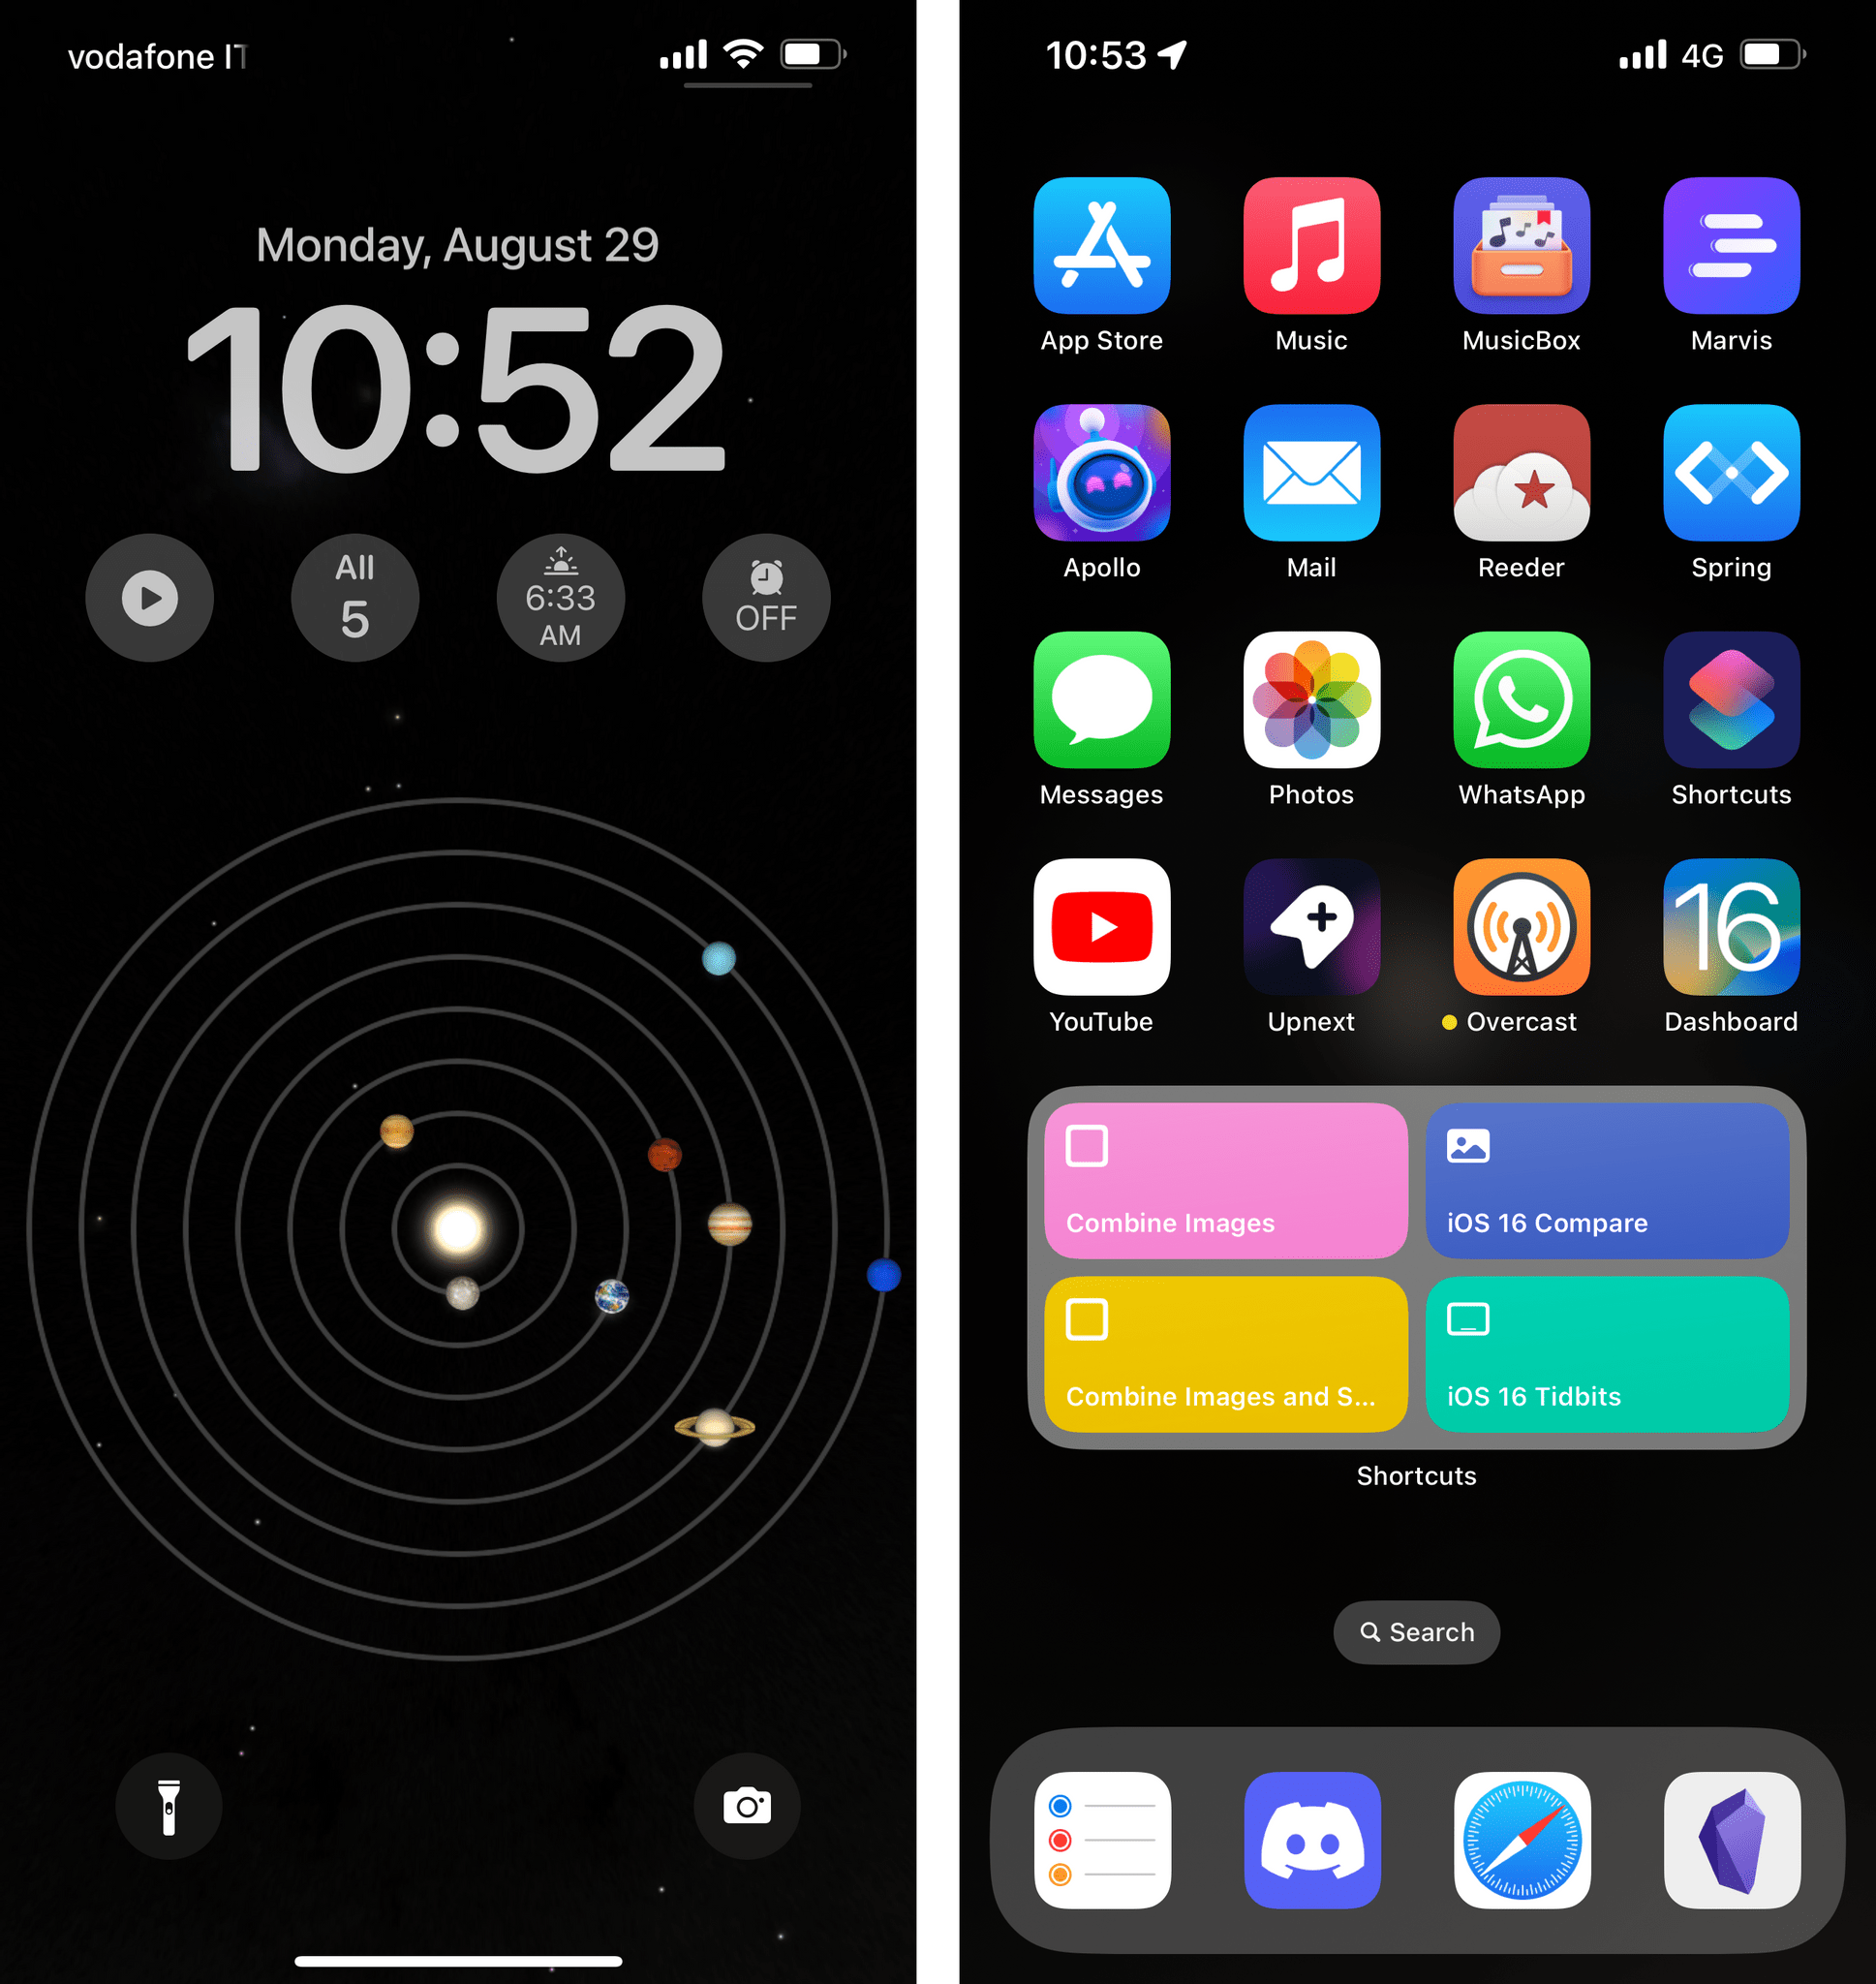 The Solar System wallpaper and my associated Home Screen.